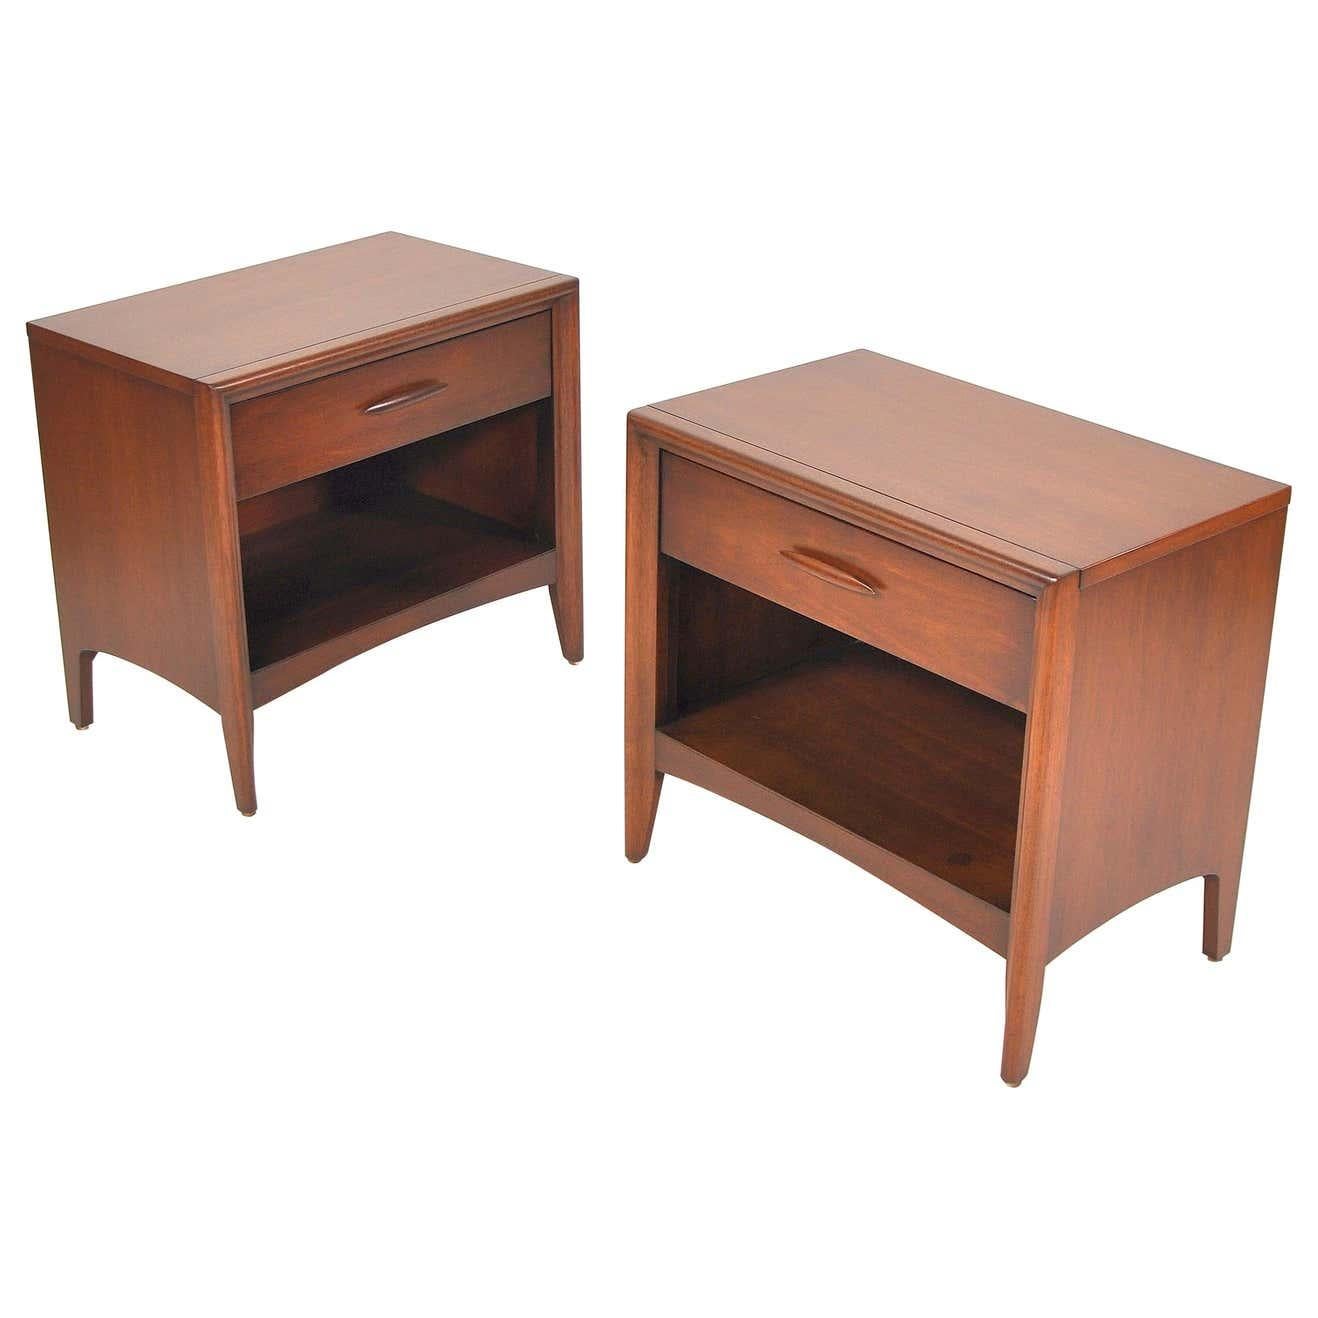 A vintage Mid-Century Modern walnut bedroom set from the Emphasis line manufactured by Broyhill in the 1960s comprising of a triple dresser and a pair of nightstands. The lowboy chest of drawers has nine drawers providing a ton of storage space.